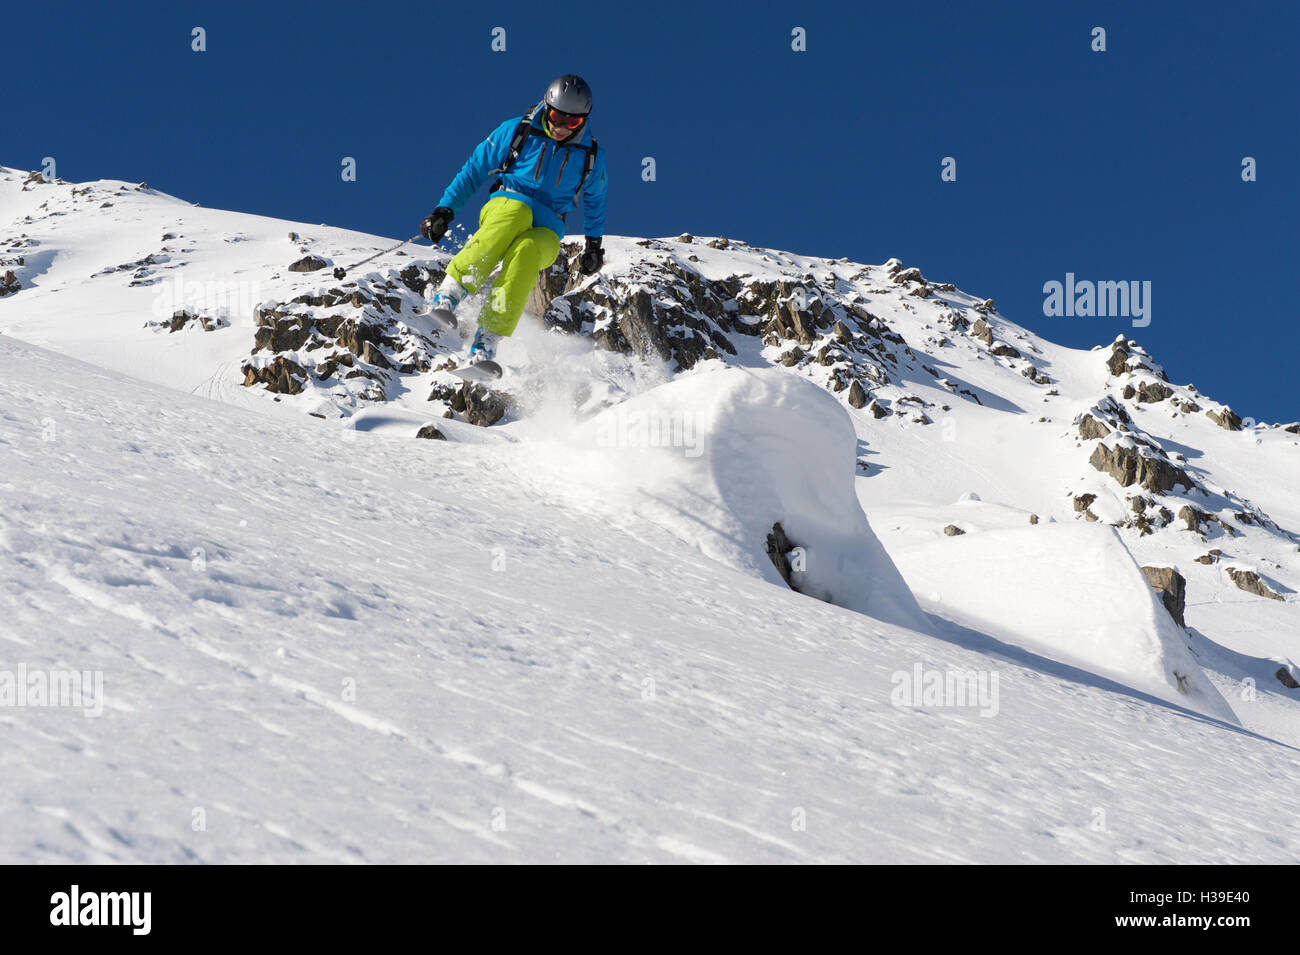 Skier jumping over a snow covered rock Stock Photo